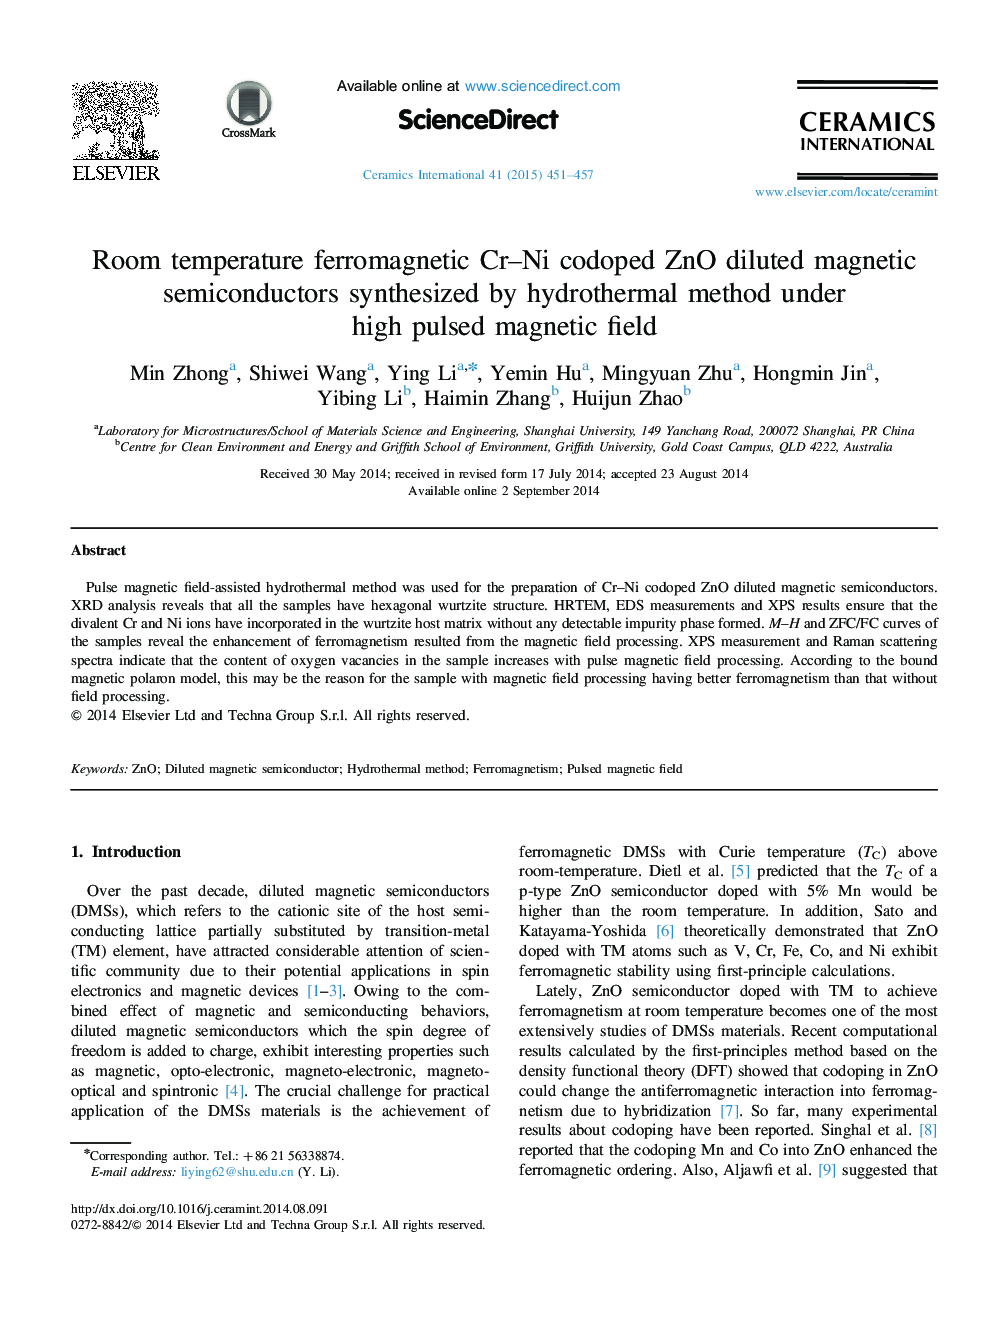 Room temperature ferromagnetic Cr–Ni codoped ZnO diluted magnetic semiconductors synthesized by hydrothermal method under high pulsed magnetic field